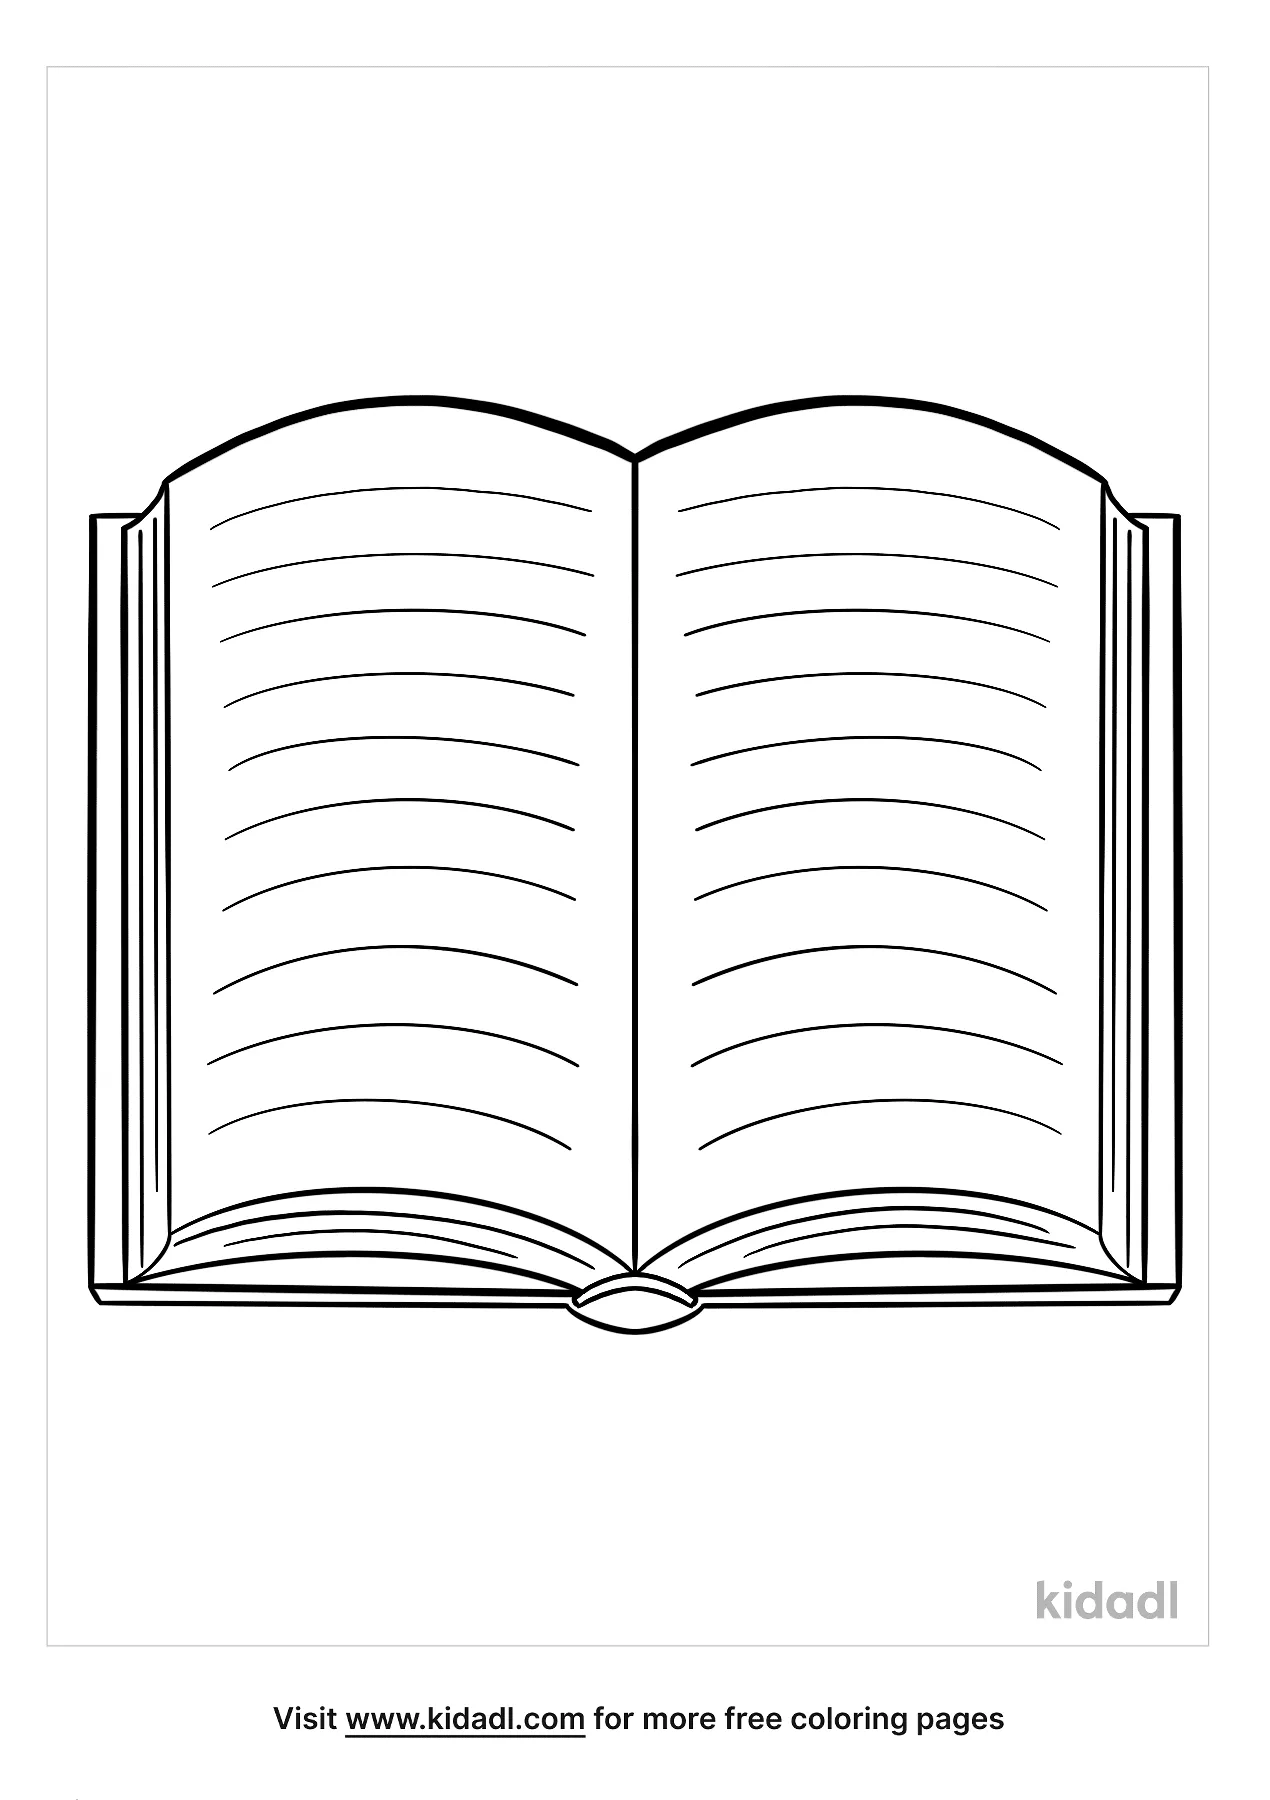 Open Book Coloring Pages   Free At home Coloring Pages   Kidadl